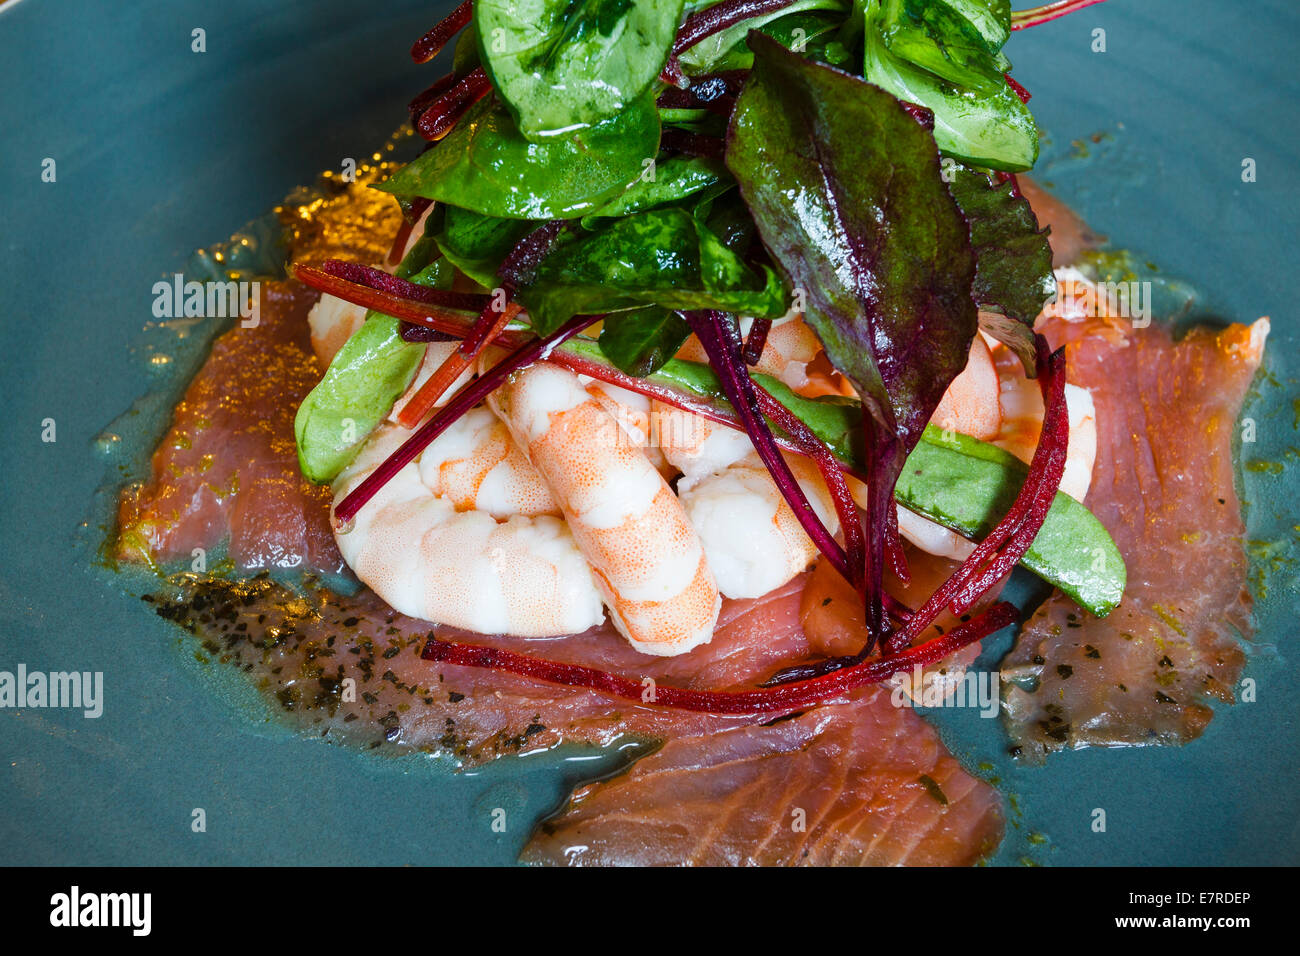 Smoked salmon and prawns salad with beetroot leaves and dressing Stock Photo